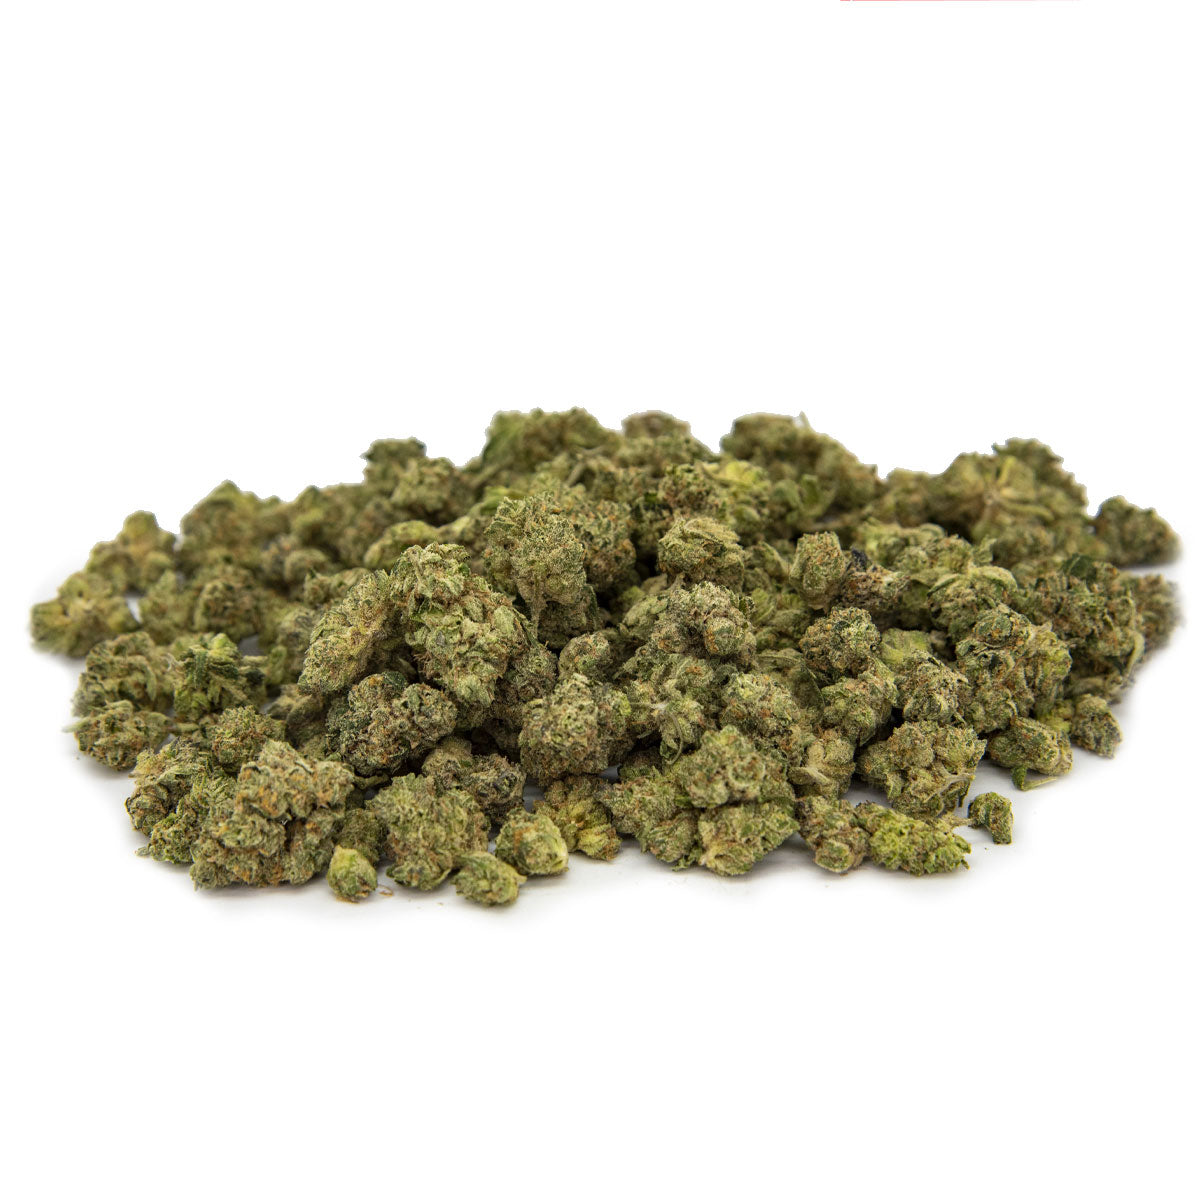 28 Grams of Small Buds Mixed Strains ~14% CBD (Exceptional Value)